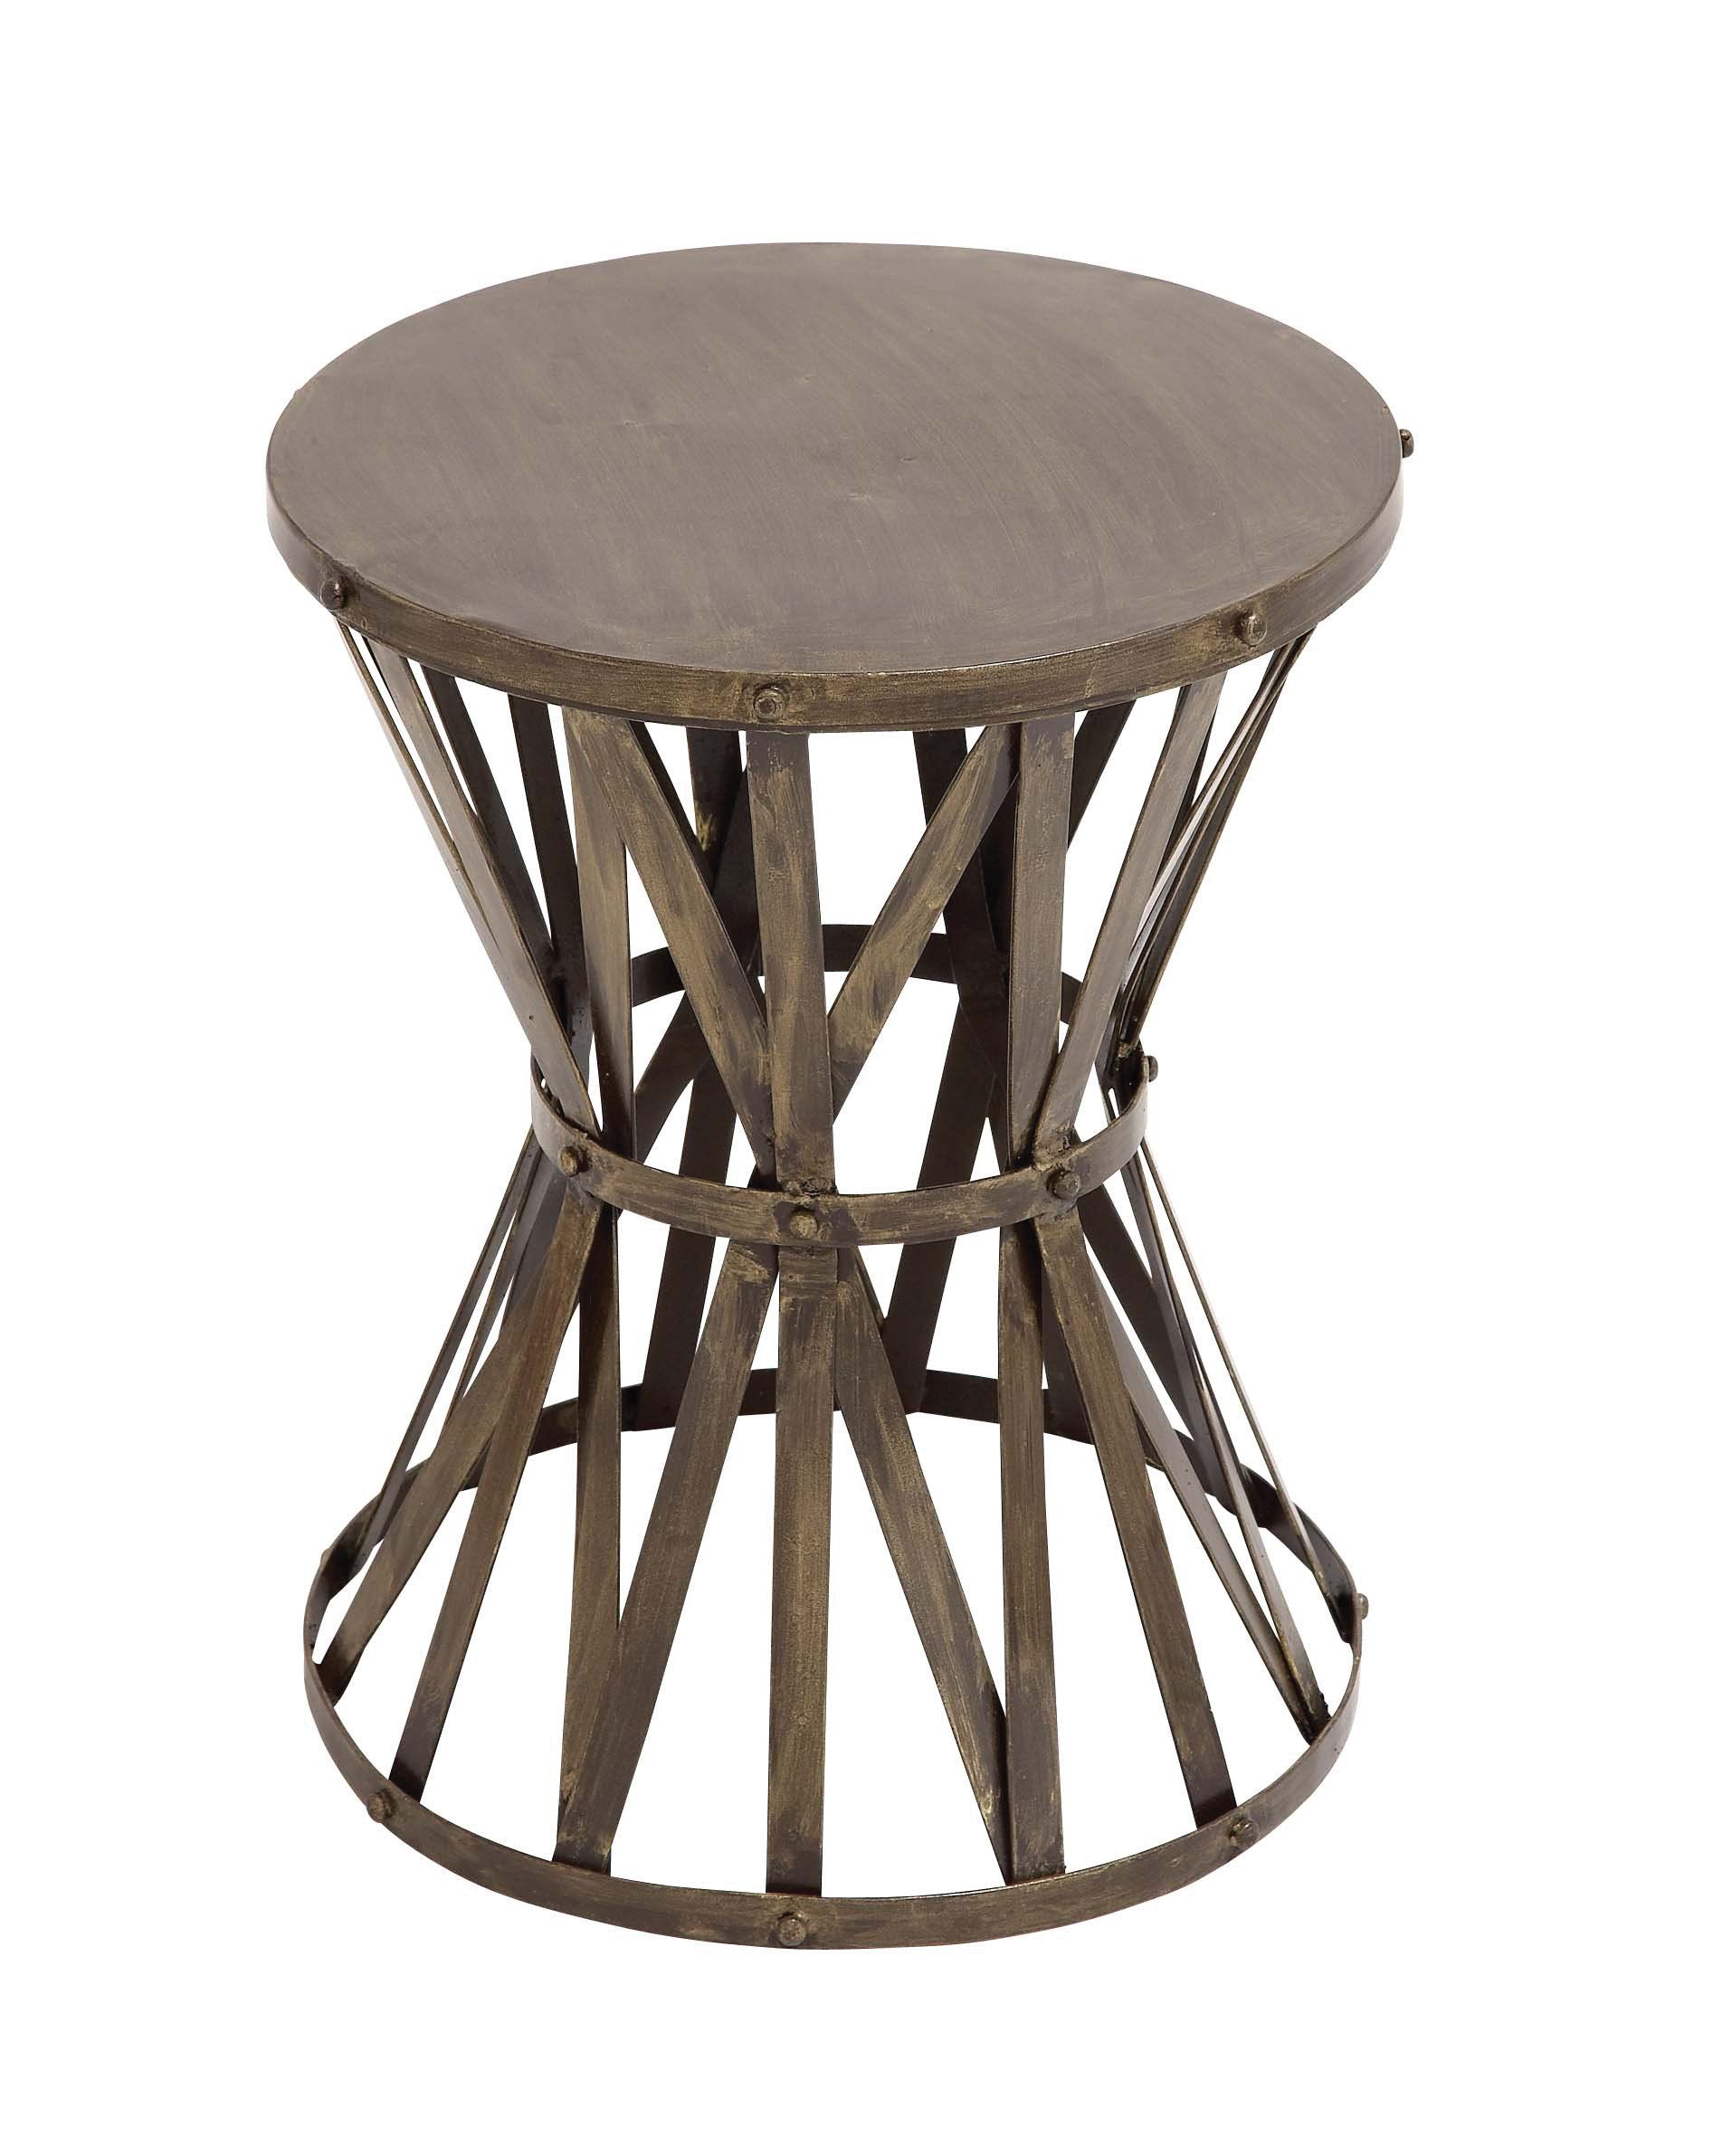 the rustic metal accent stool products accents outdoor drum table decmode set beside sofa armchair empty corner your living space bring some live edge top foyer umbrella chinese